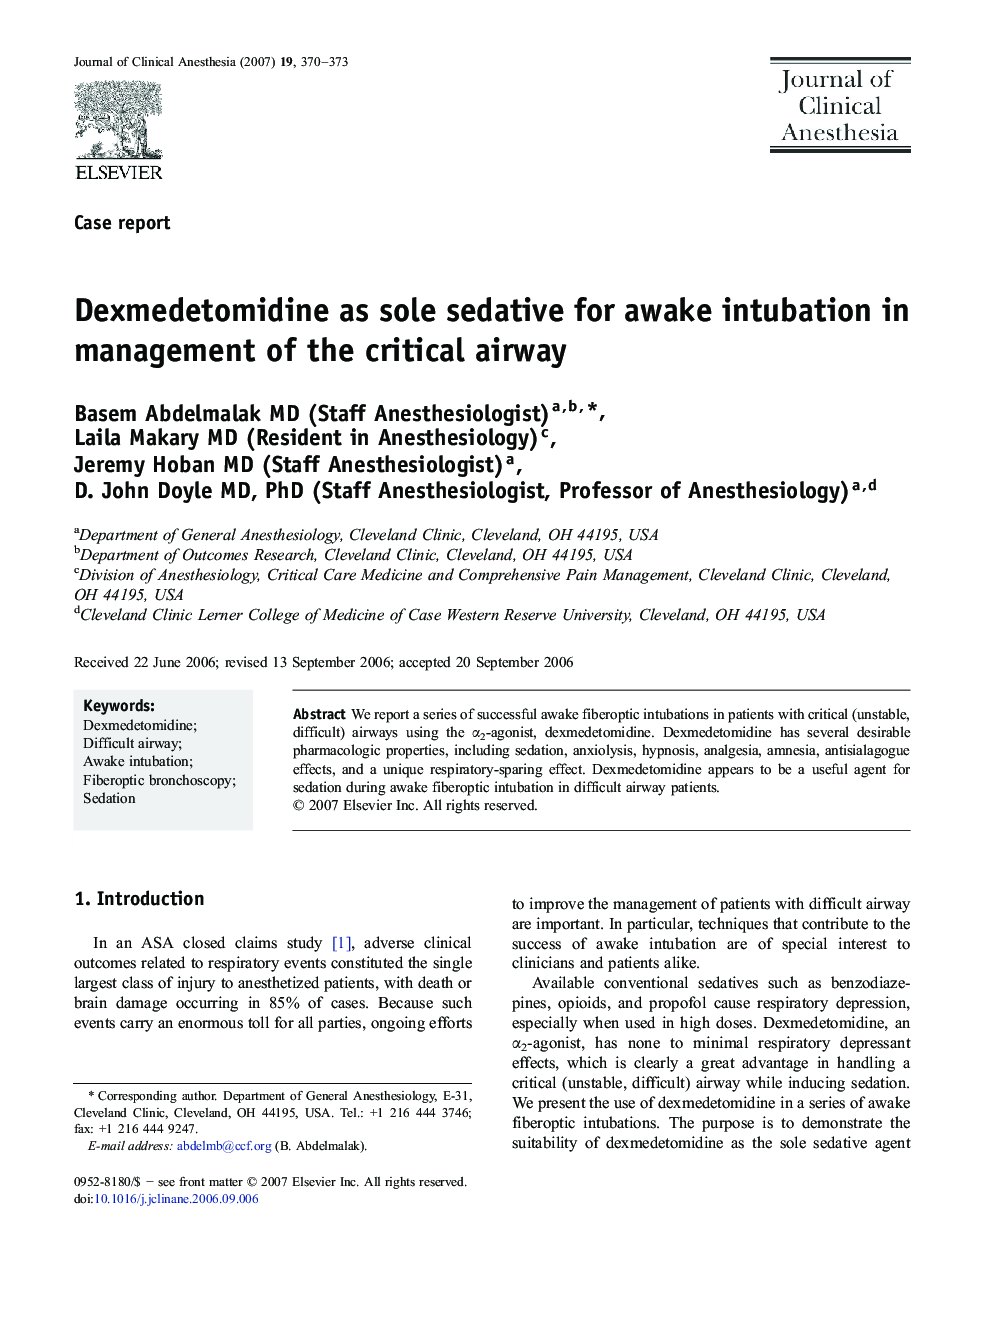 Dexmedetomidine as sole sedative for awake intubation in management of the critical airway